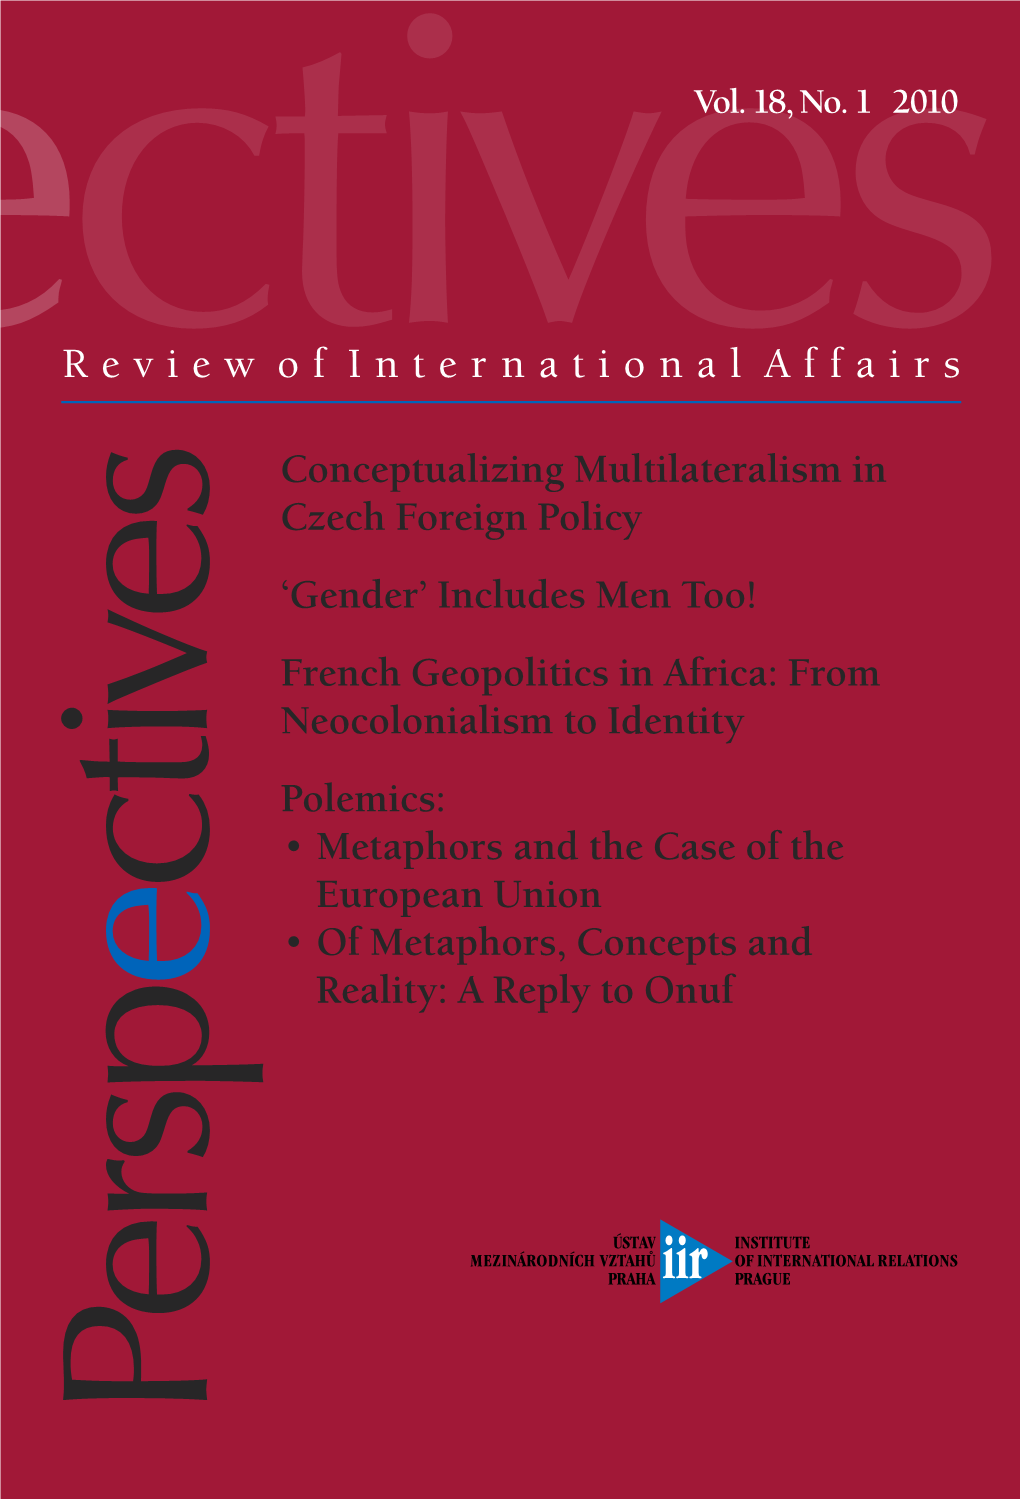 Perspectives: Review of International Affairs Vol 18 No 1 (2010)